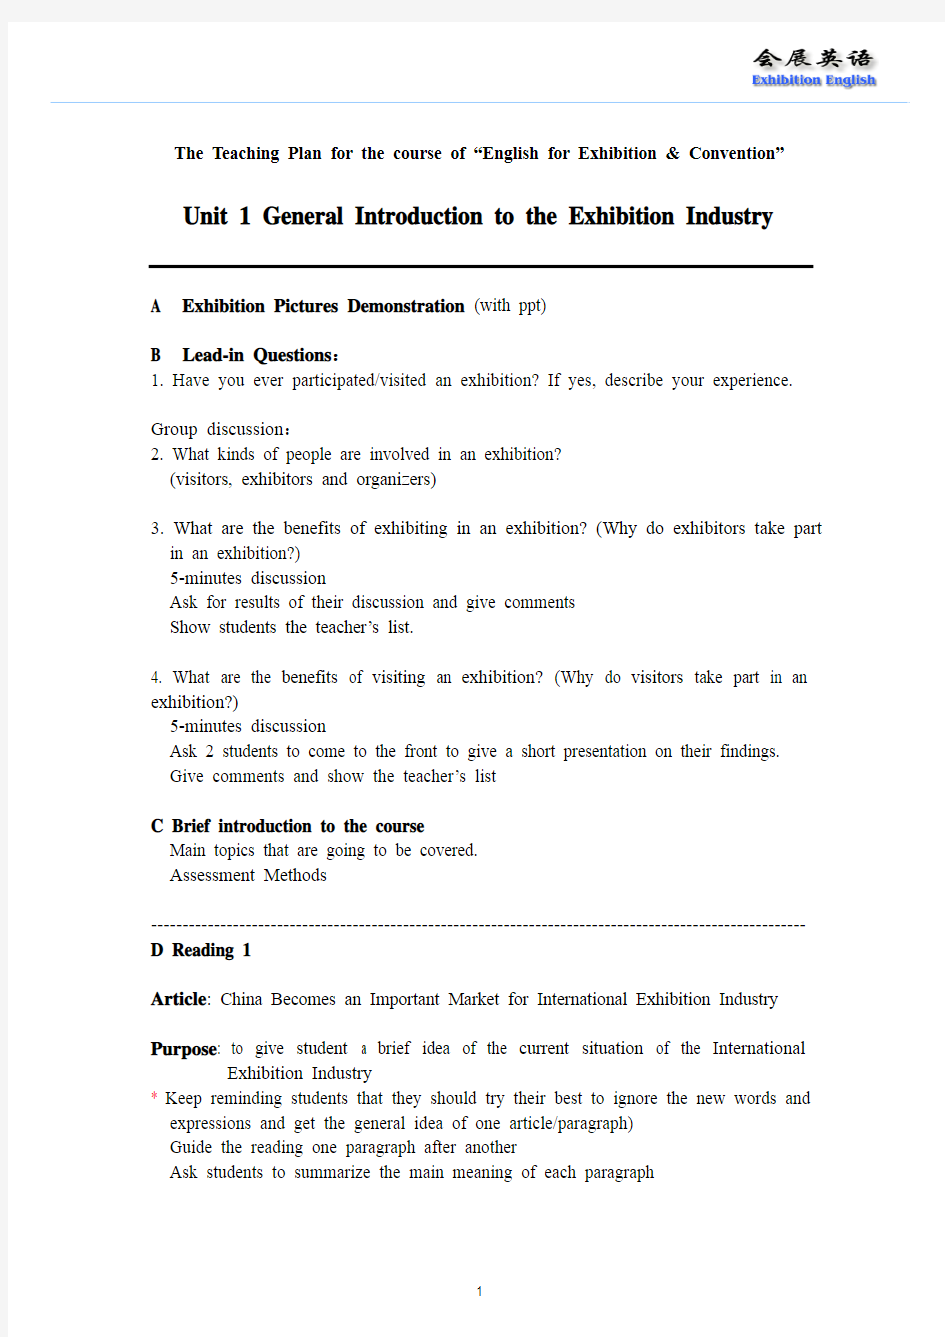 unit 1 General Introduction to the Exhibition Industry